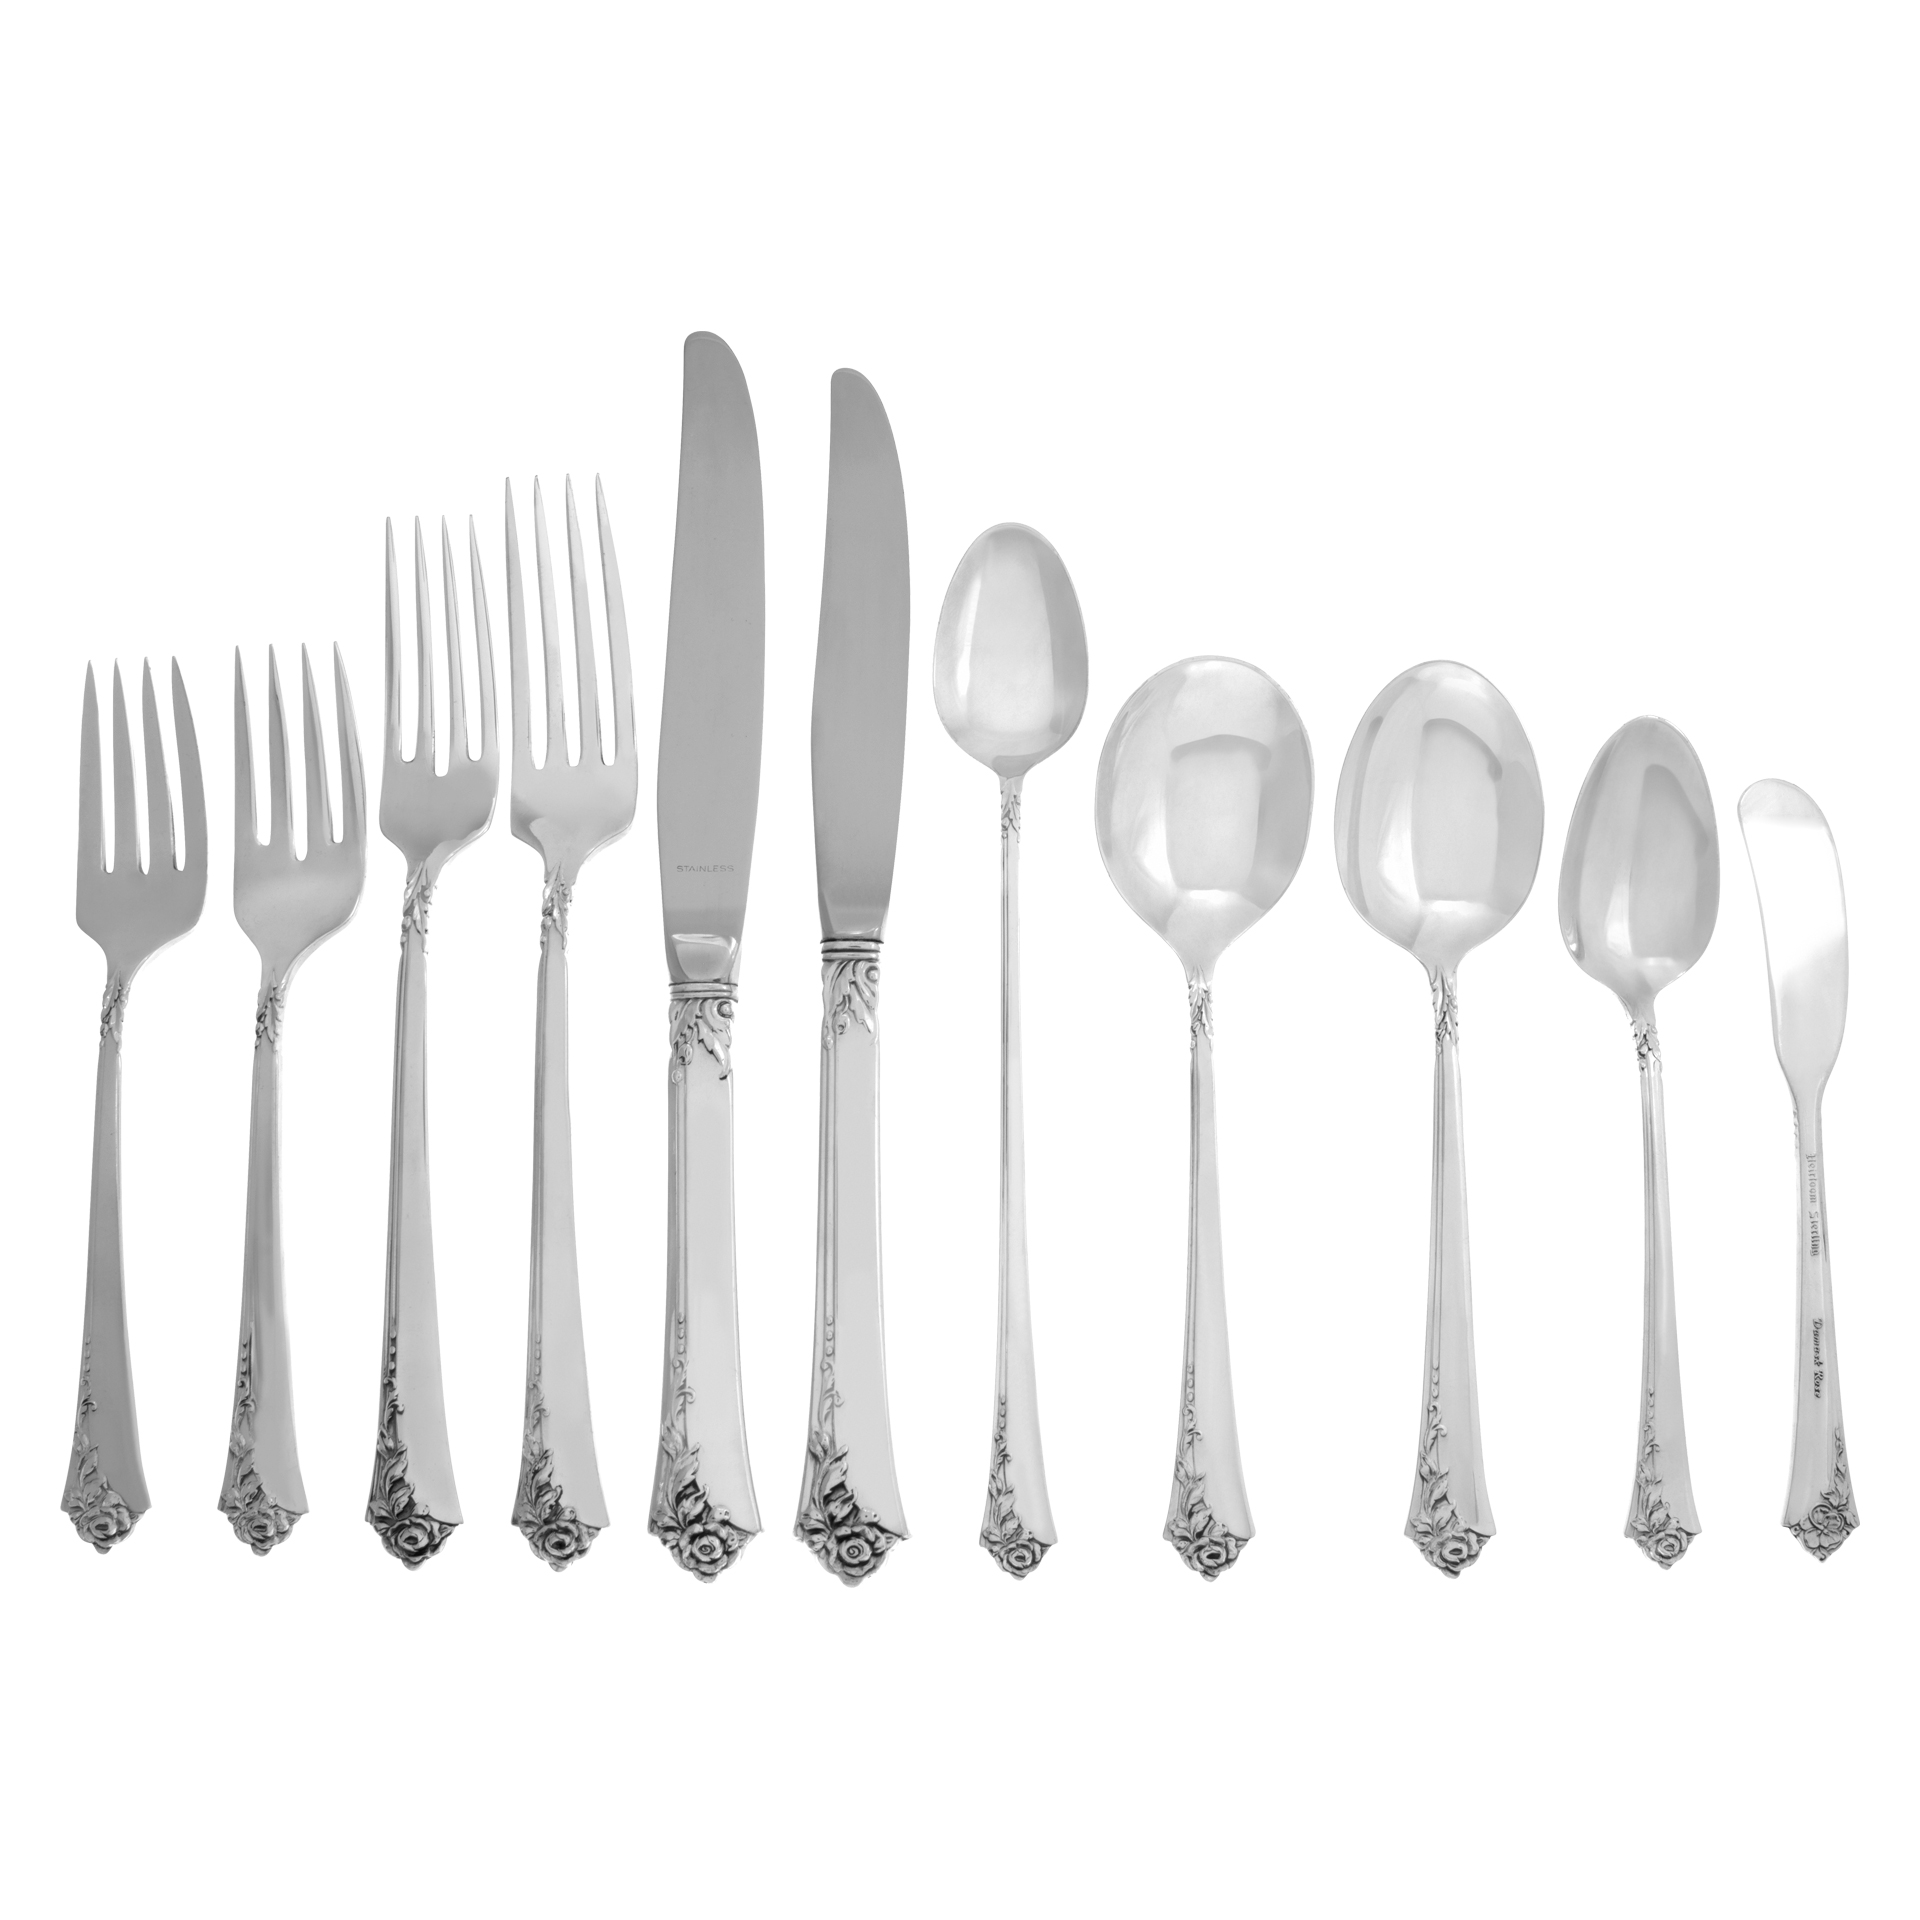 DAMASK ROSE Sterling Silver flatware set, 6 place set for 12 (lots of xtra pieces), patented in 1946 by Heirloom. 158 pieces, dinner & lunch set witrh 12 serving pieces